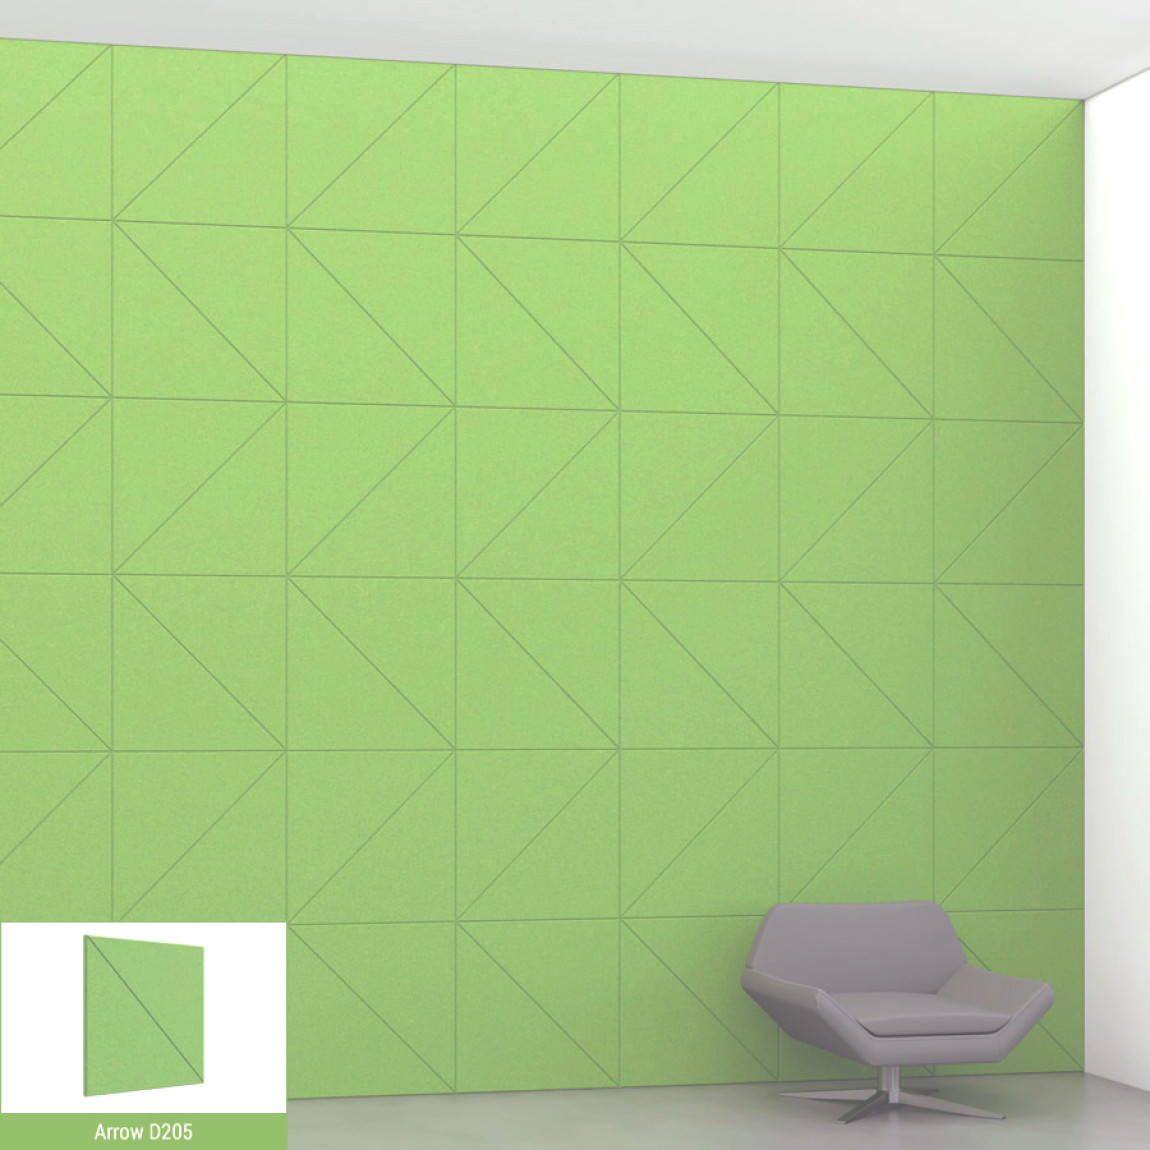 Sound Absorbent Acoustic Wall Tiles